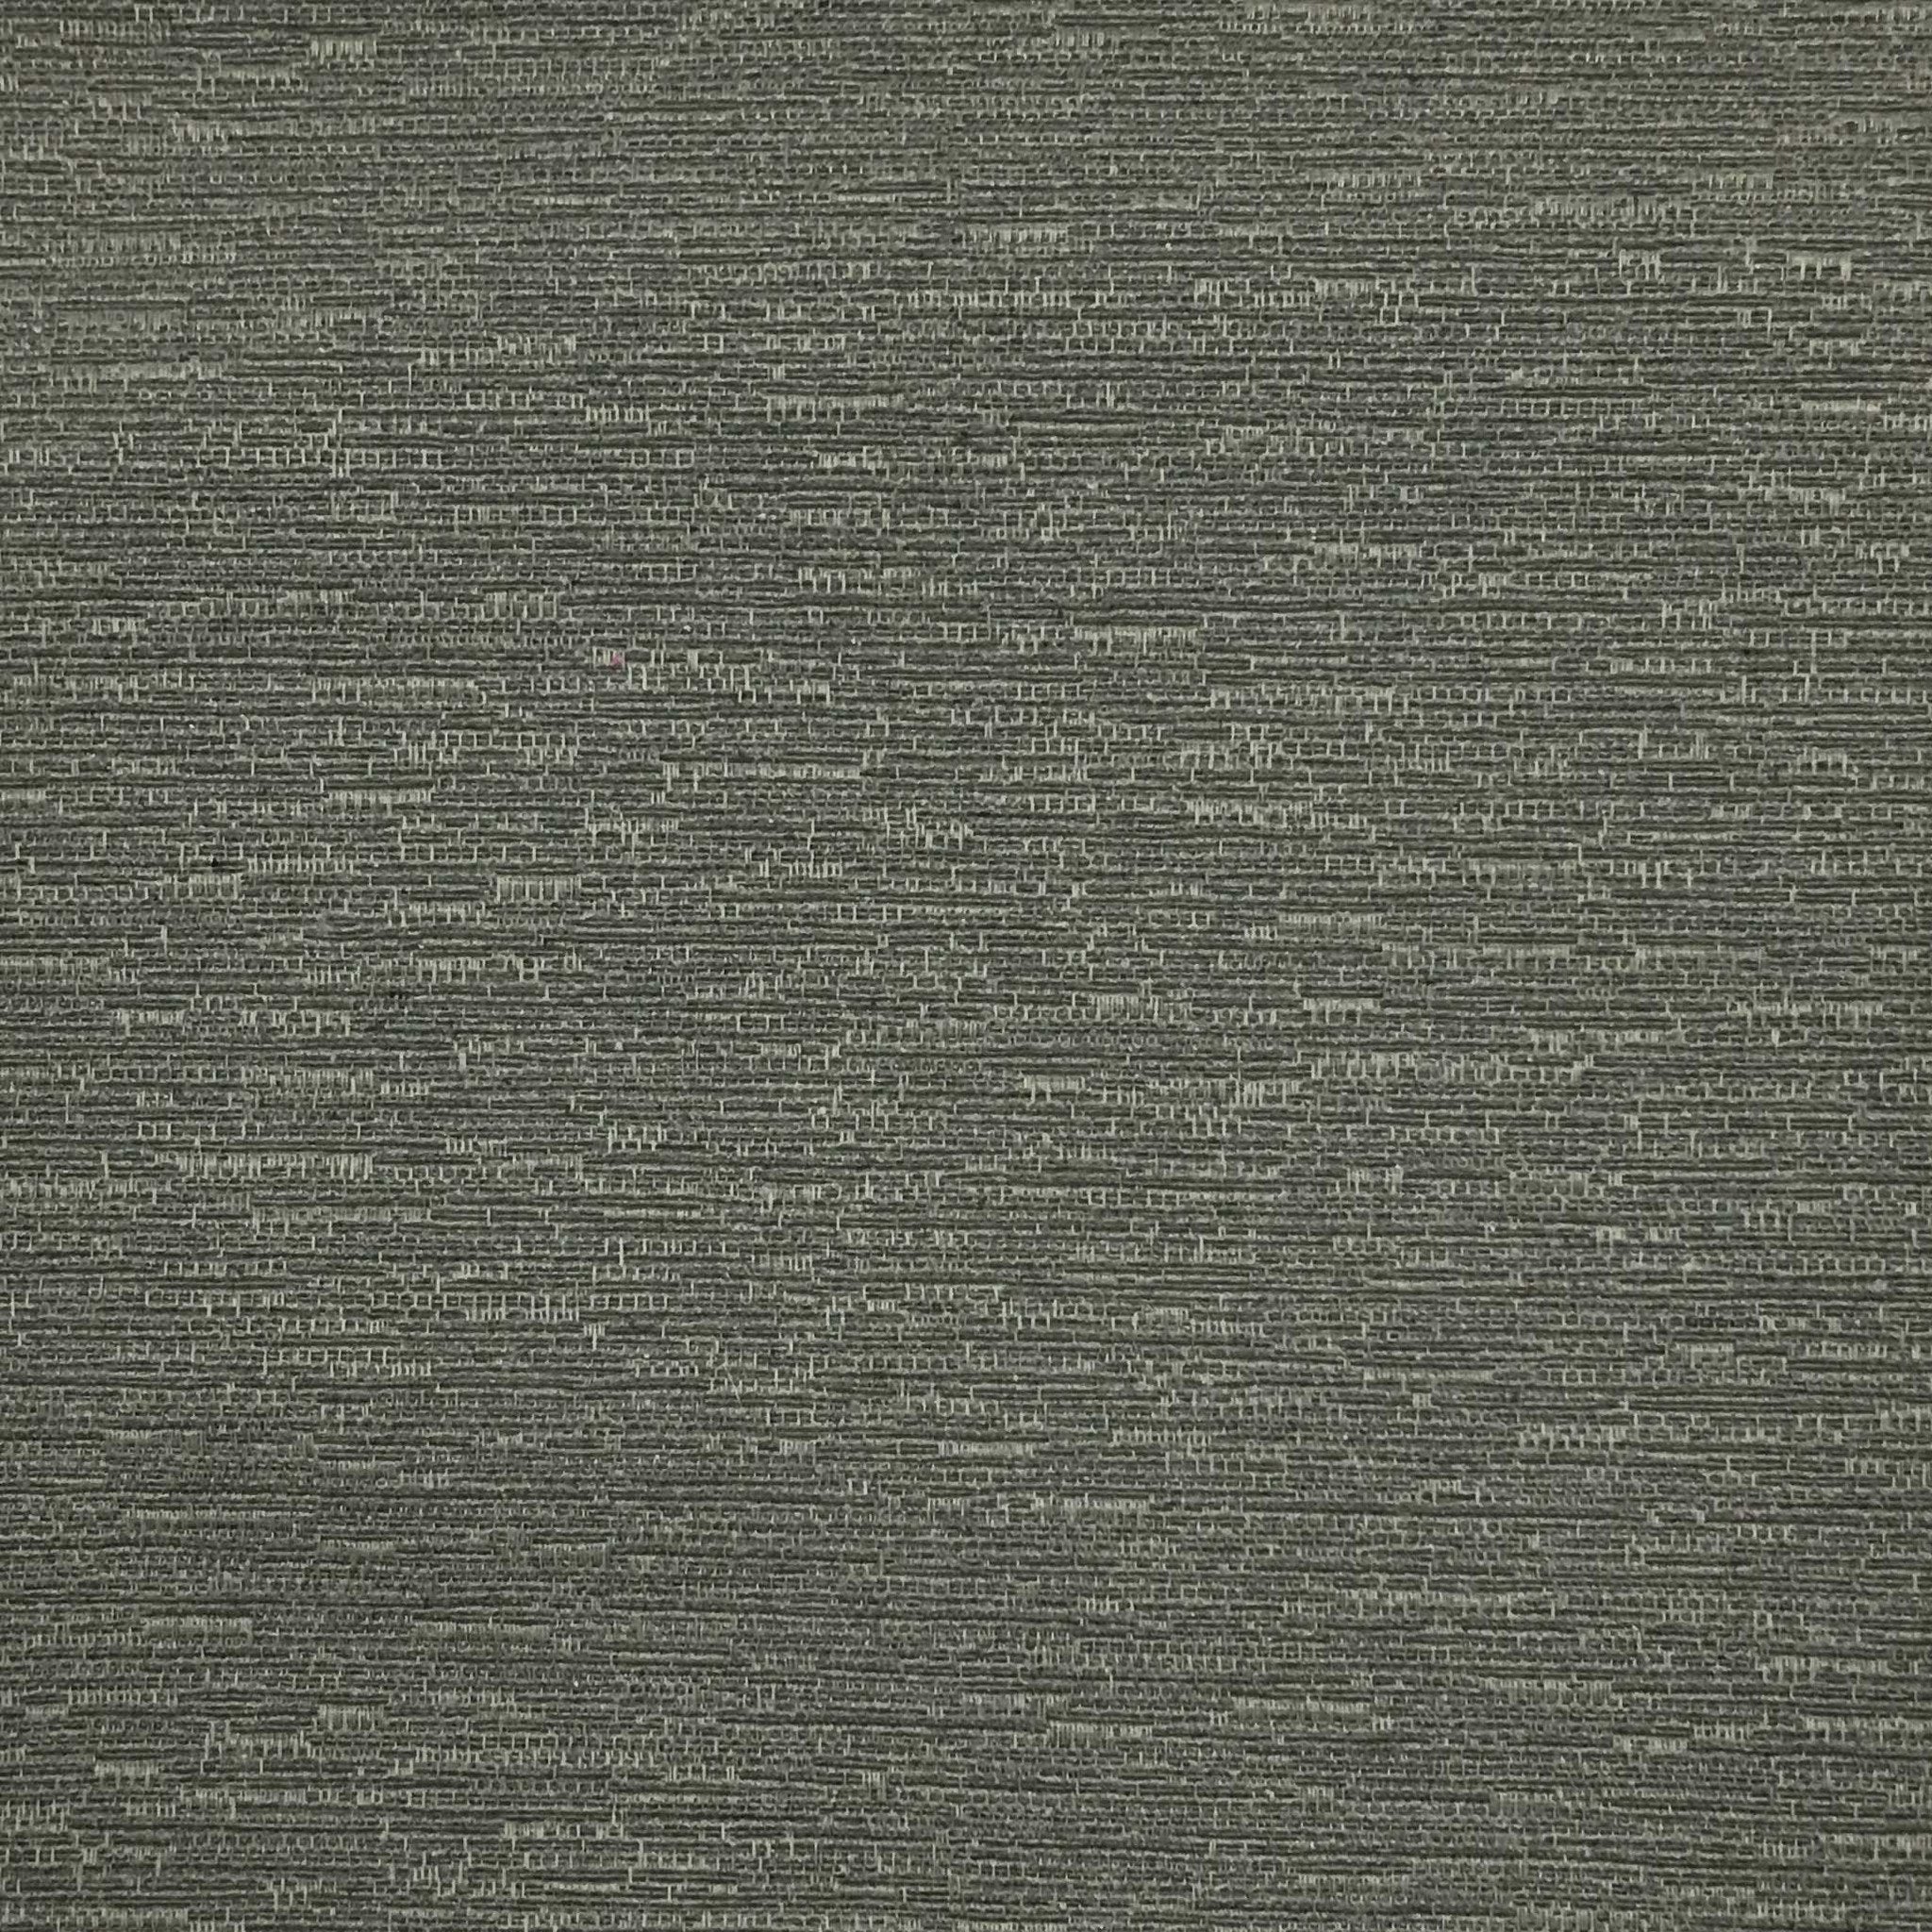 Gene - Cotton Polyester Blend Home Decor Textured Fabric by the Yard